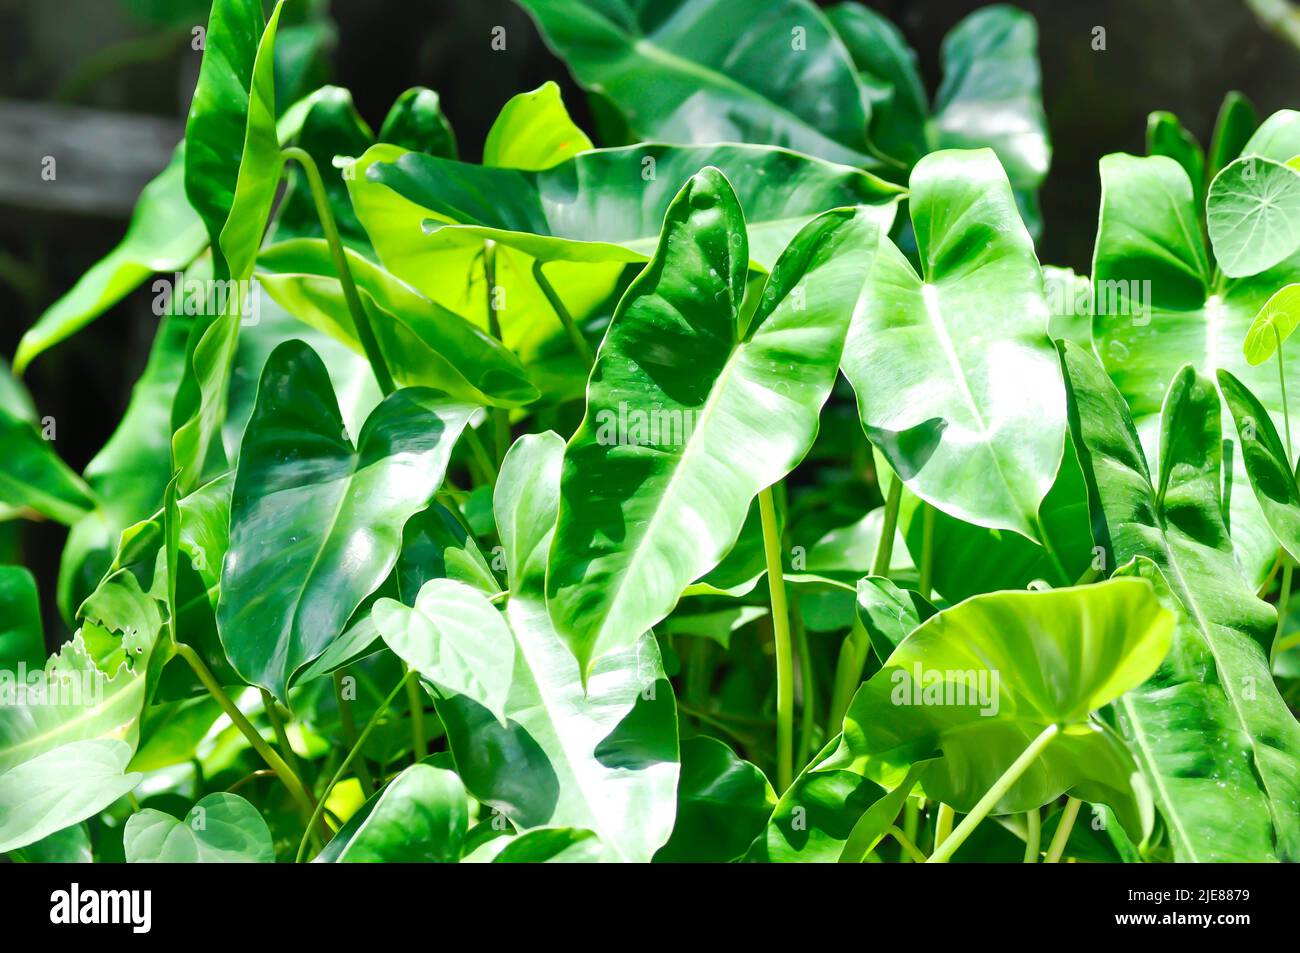 Philodendron burle marxii, Philodendron plant or green leaf background Stock Photo